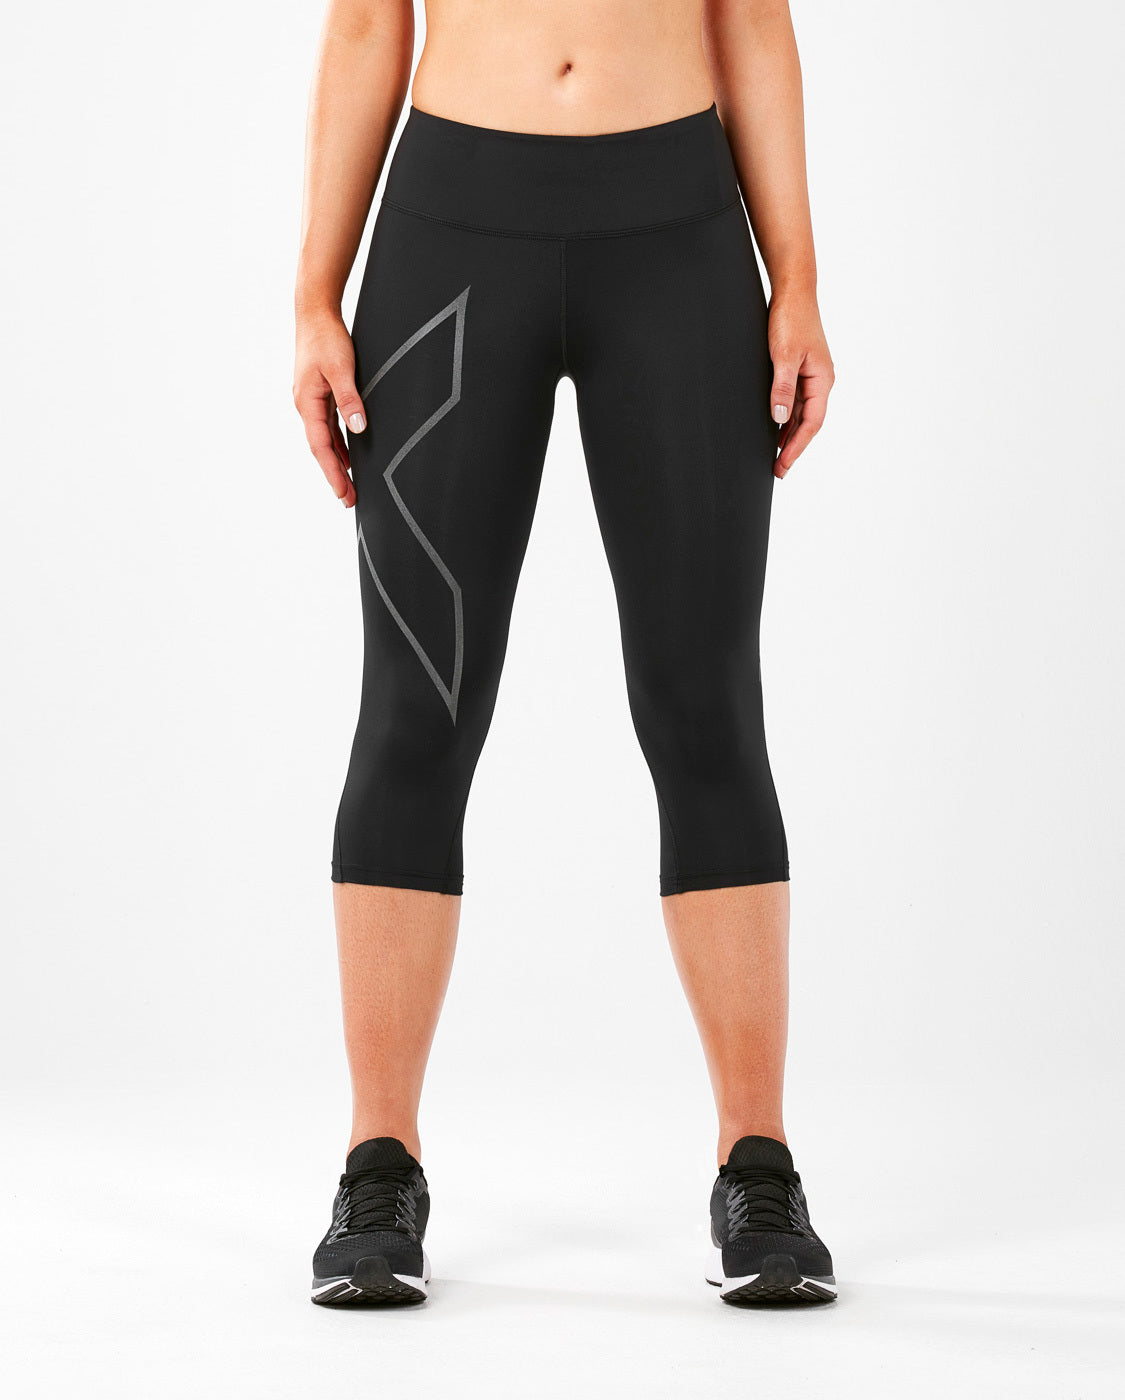 2XU WOMEN'S RISE COMPRESSION TIGHTS | POWER SPORTS MALAYSIA – Key Power Sports Malaysia